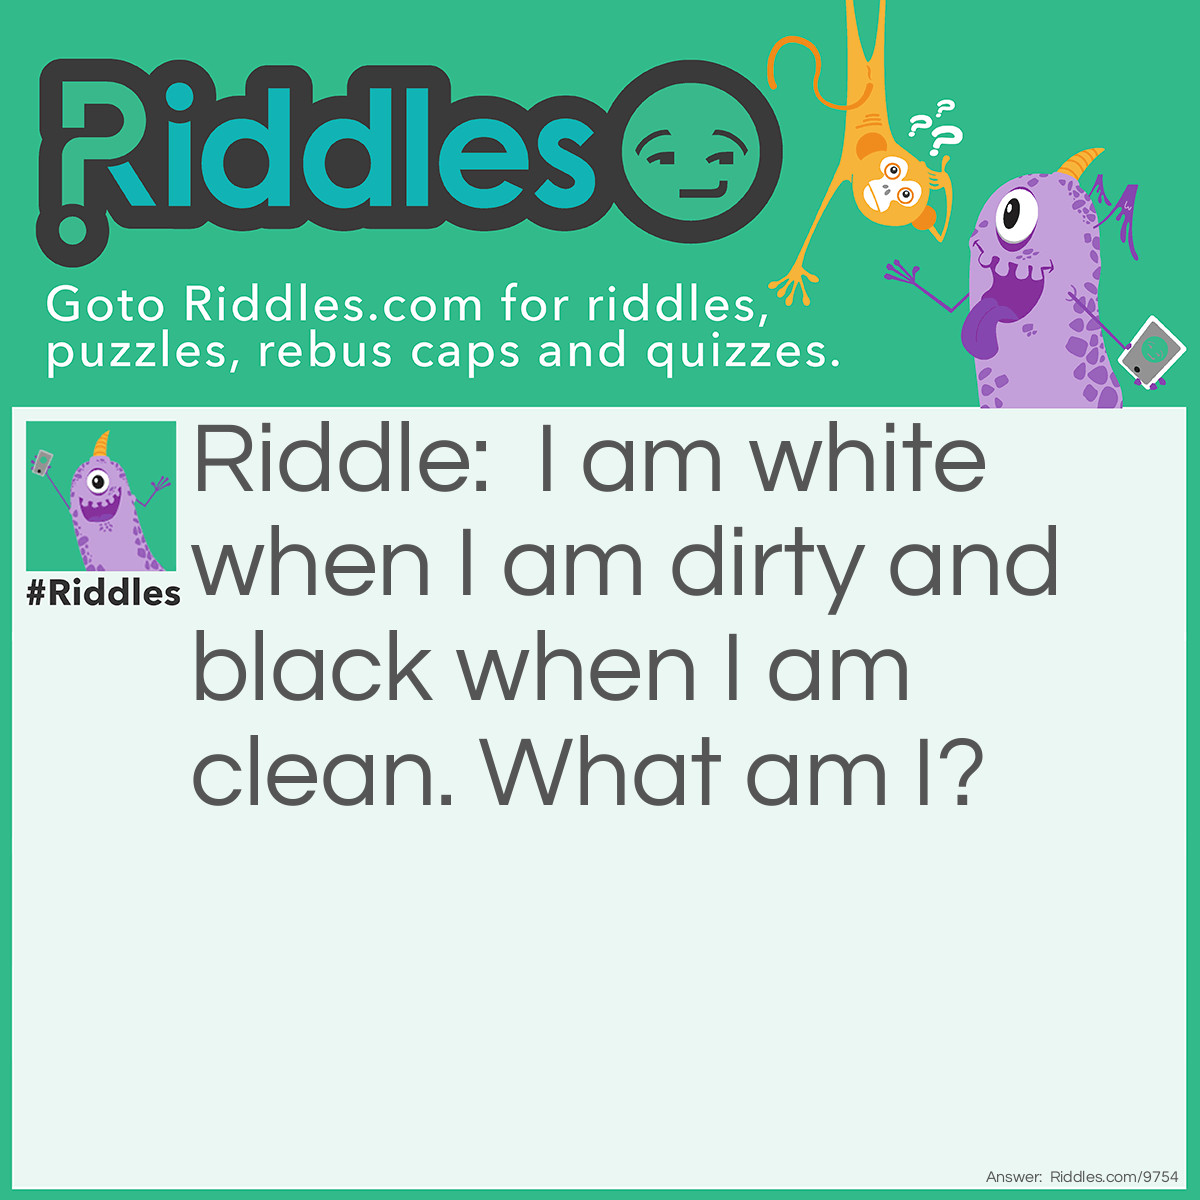 Riddle: I am white when I am dirty and black when I am clean. What am I? Answer: A blackboard/a chalkboard.